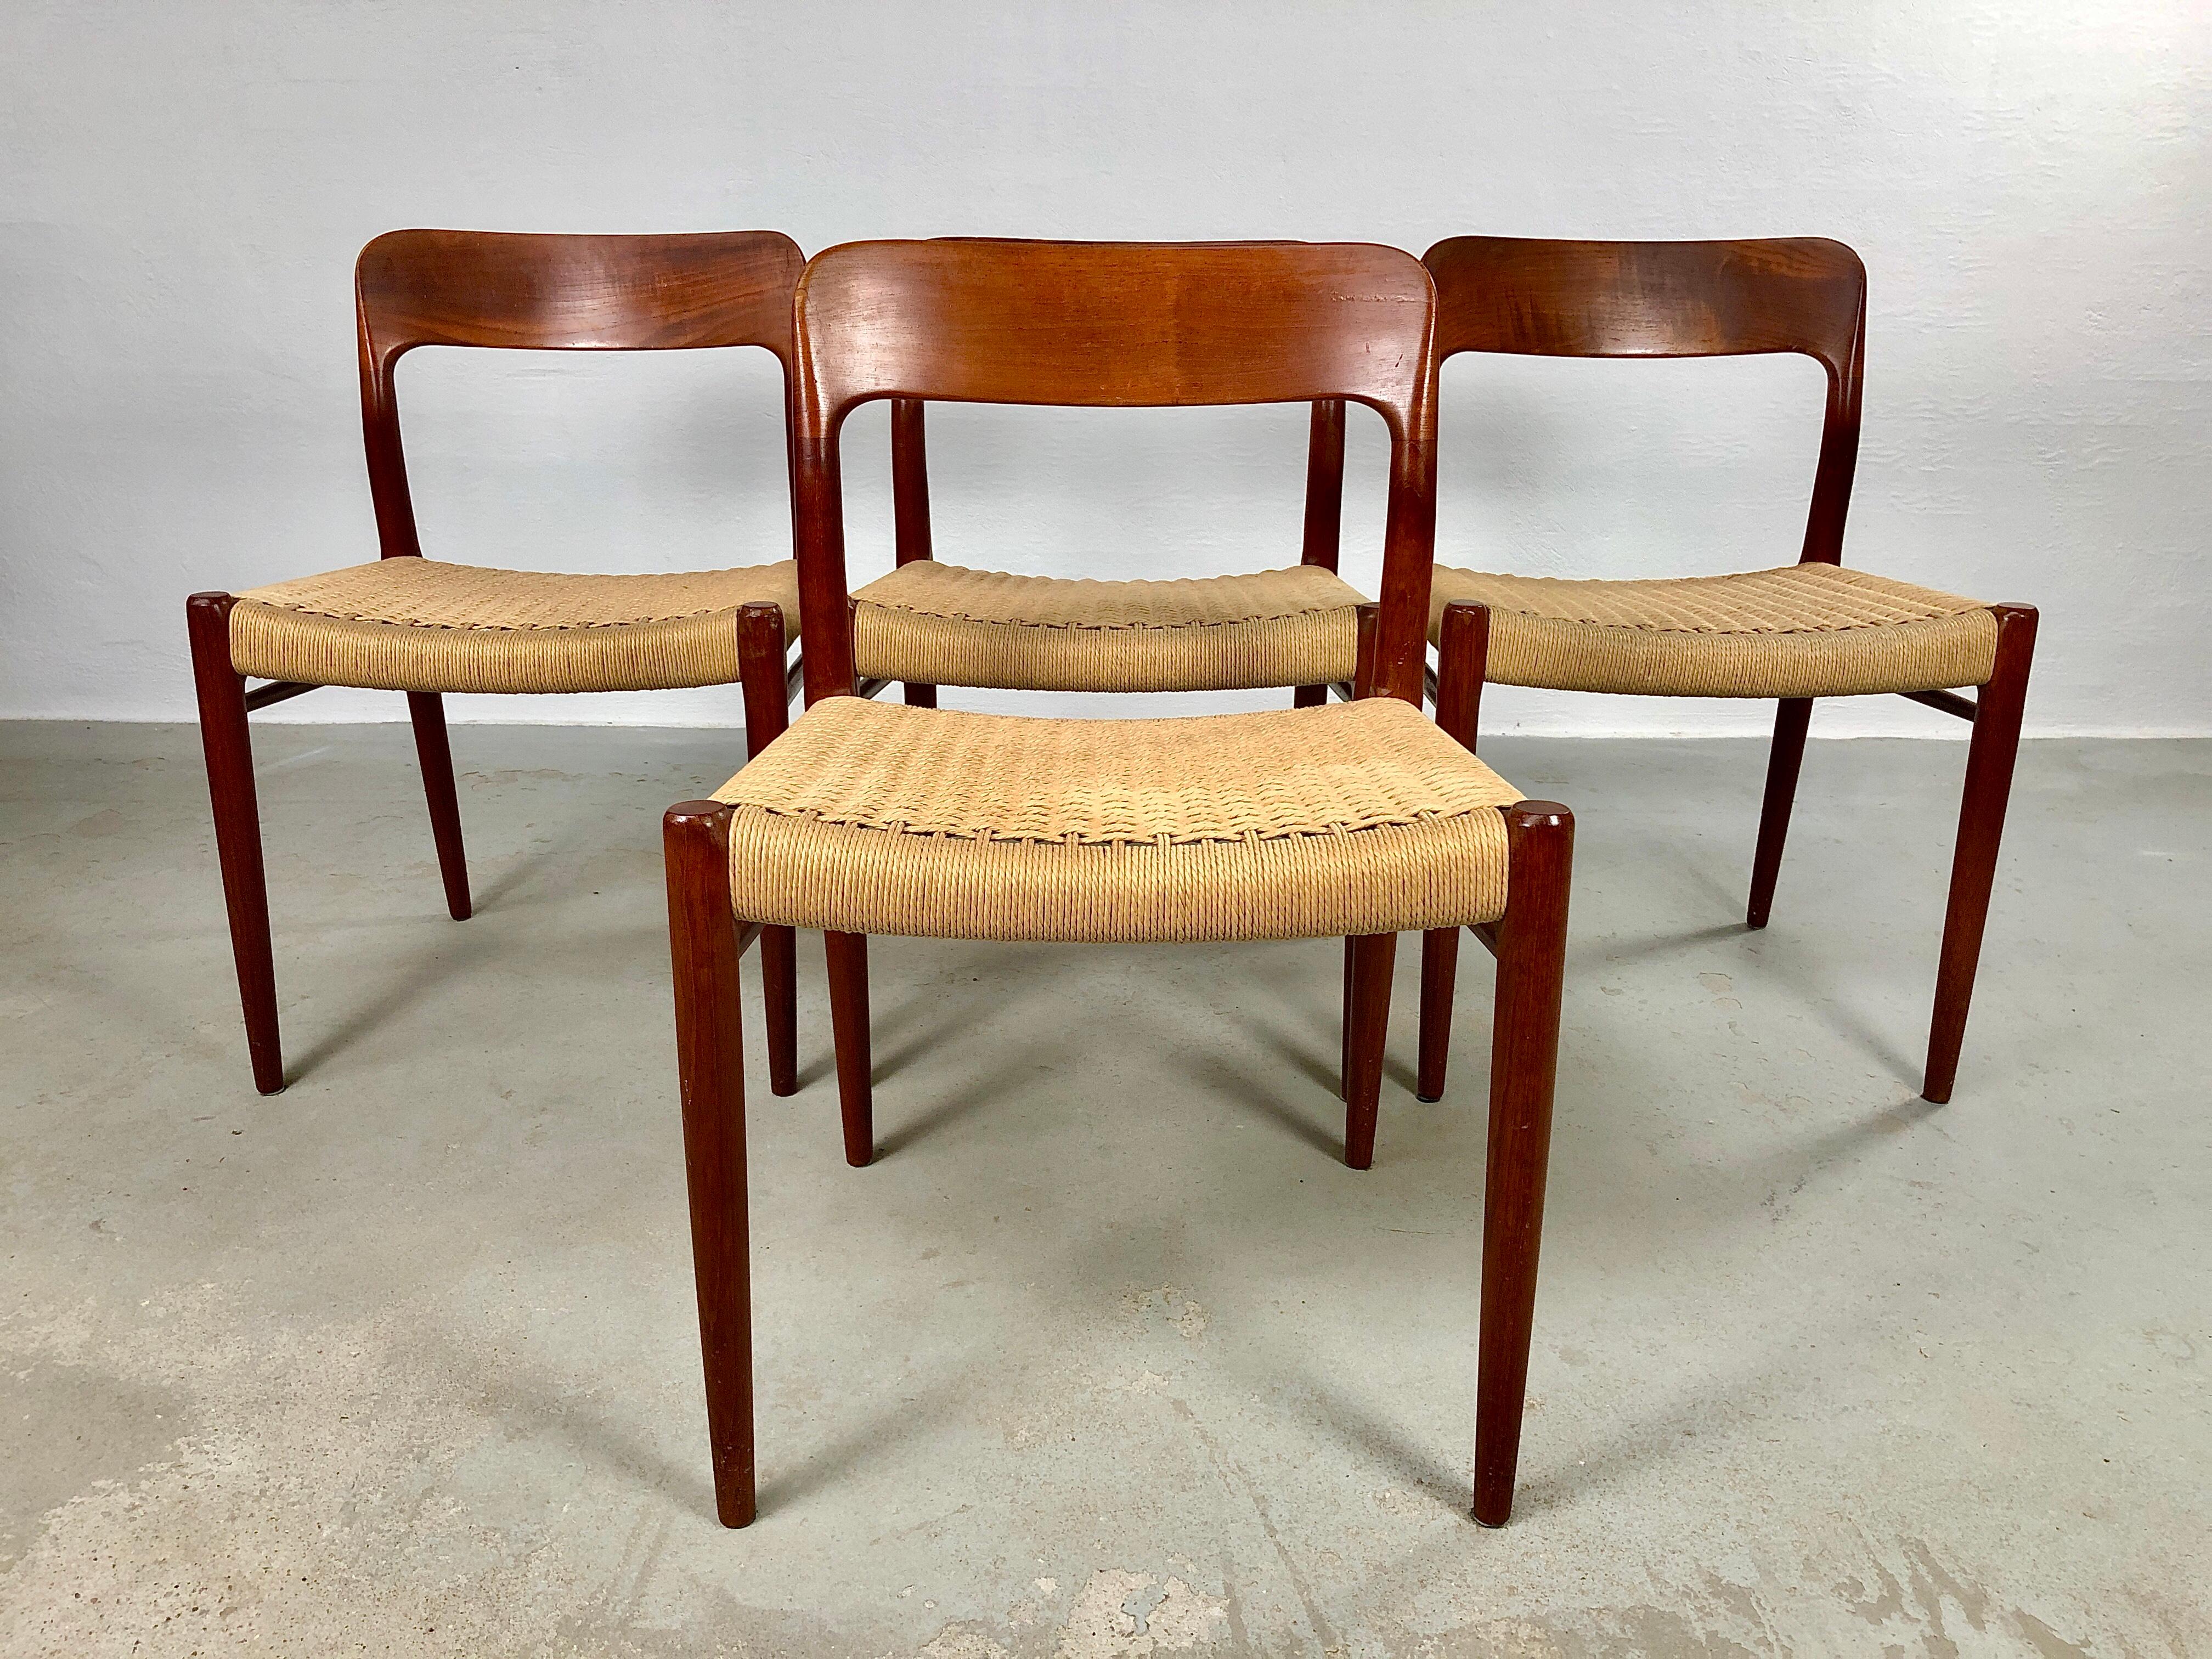 Set of four fully restored Niels Otto Møller model 77 teak dining chairs with papercord seats designed by by Niels Otto Møller in 1959 and manufactored by J.L. Møllers Møbelfabrik in the 1960´s.

Niels Otto Møller was among the top danish mid